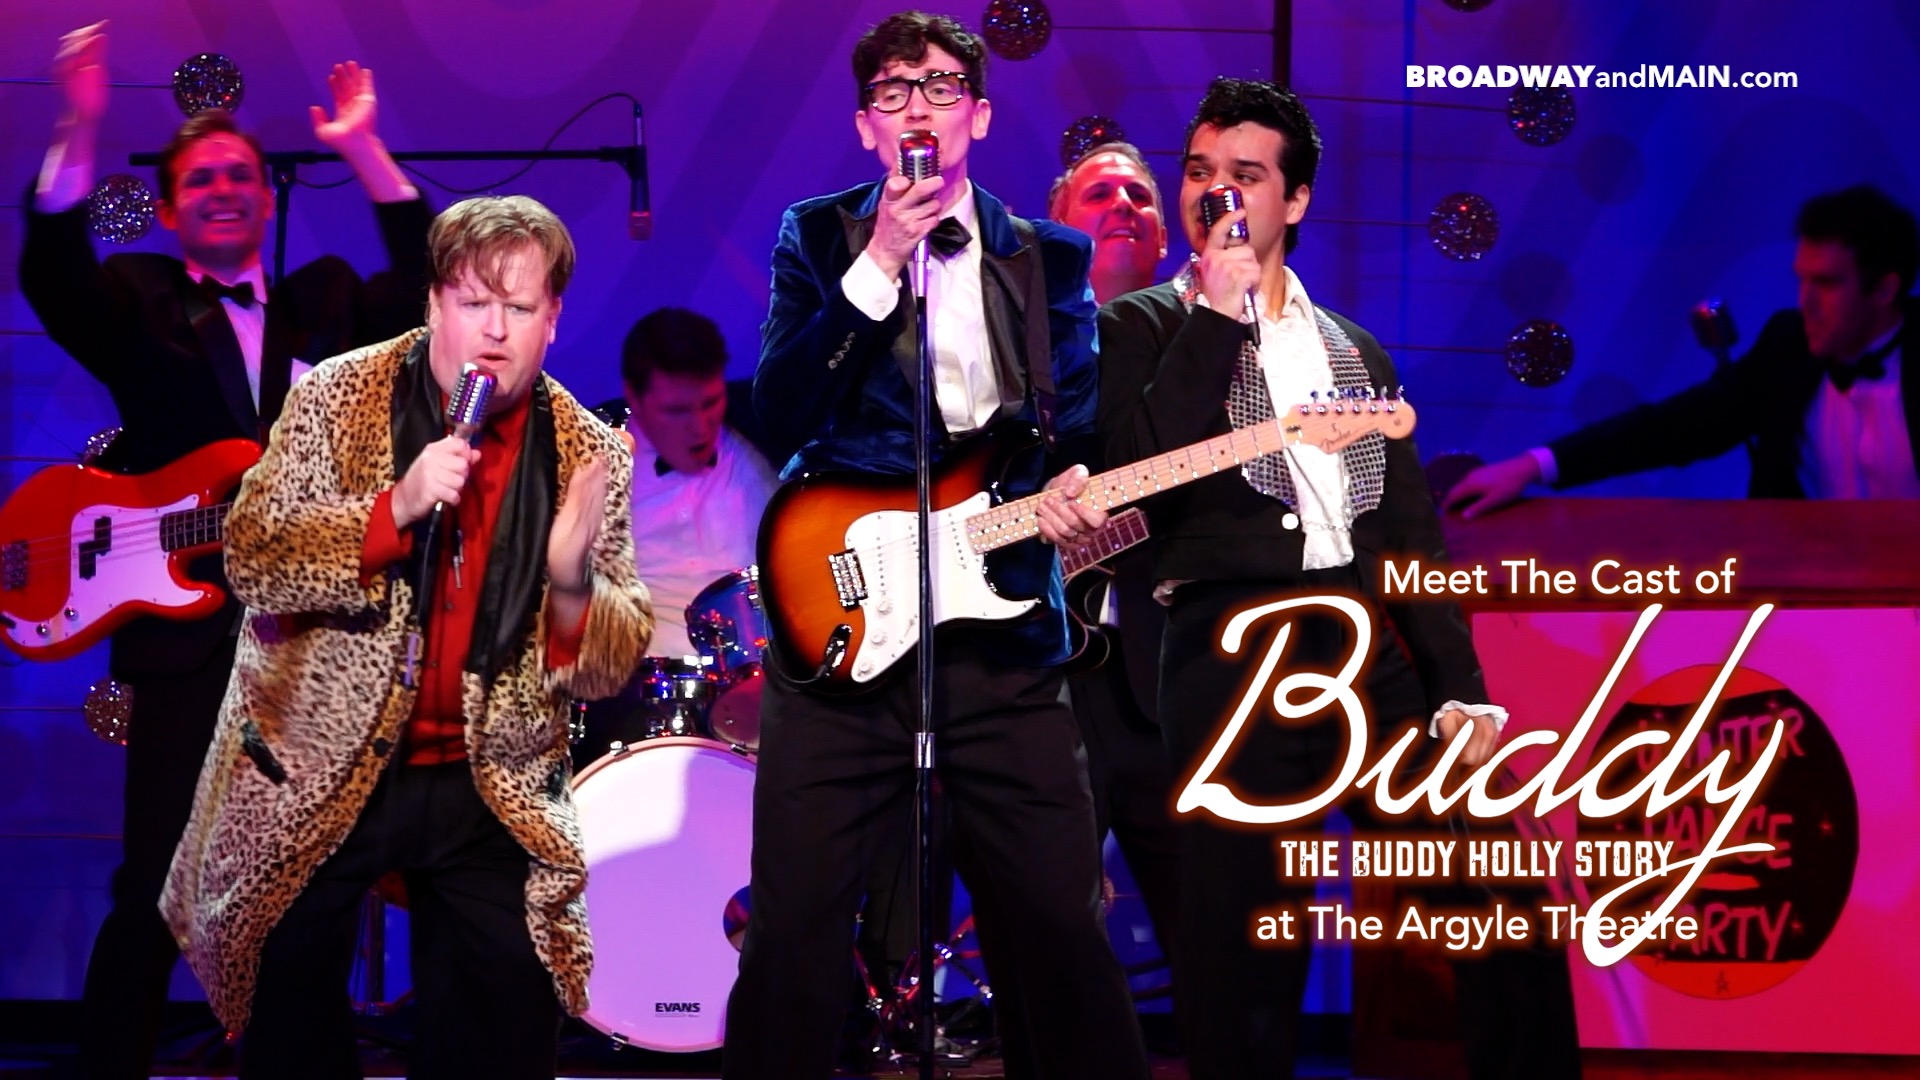 Meet the Cast of Buddy: The Buddy Holly Story at the Argyle Theatre